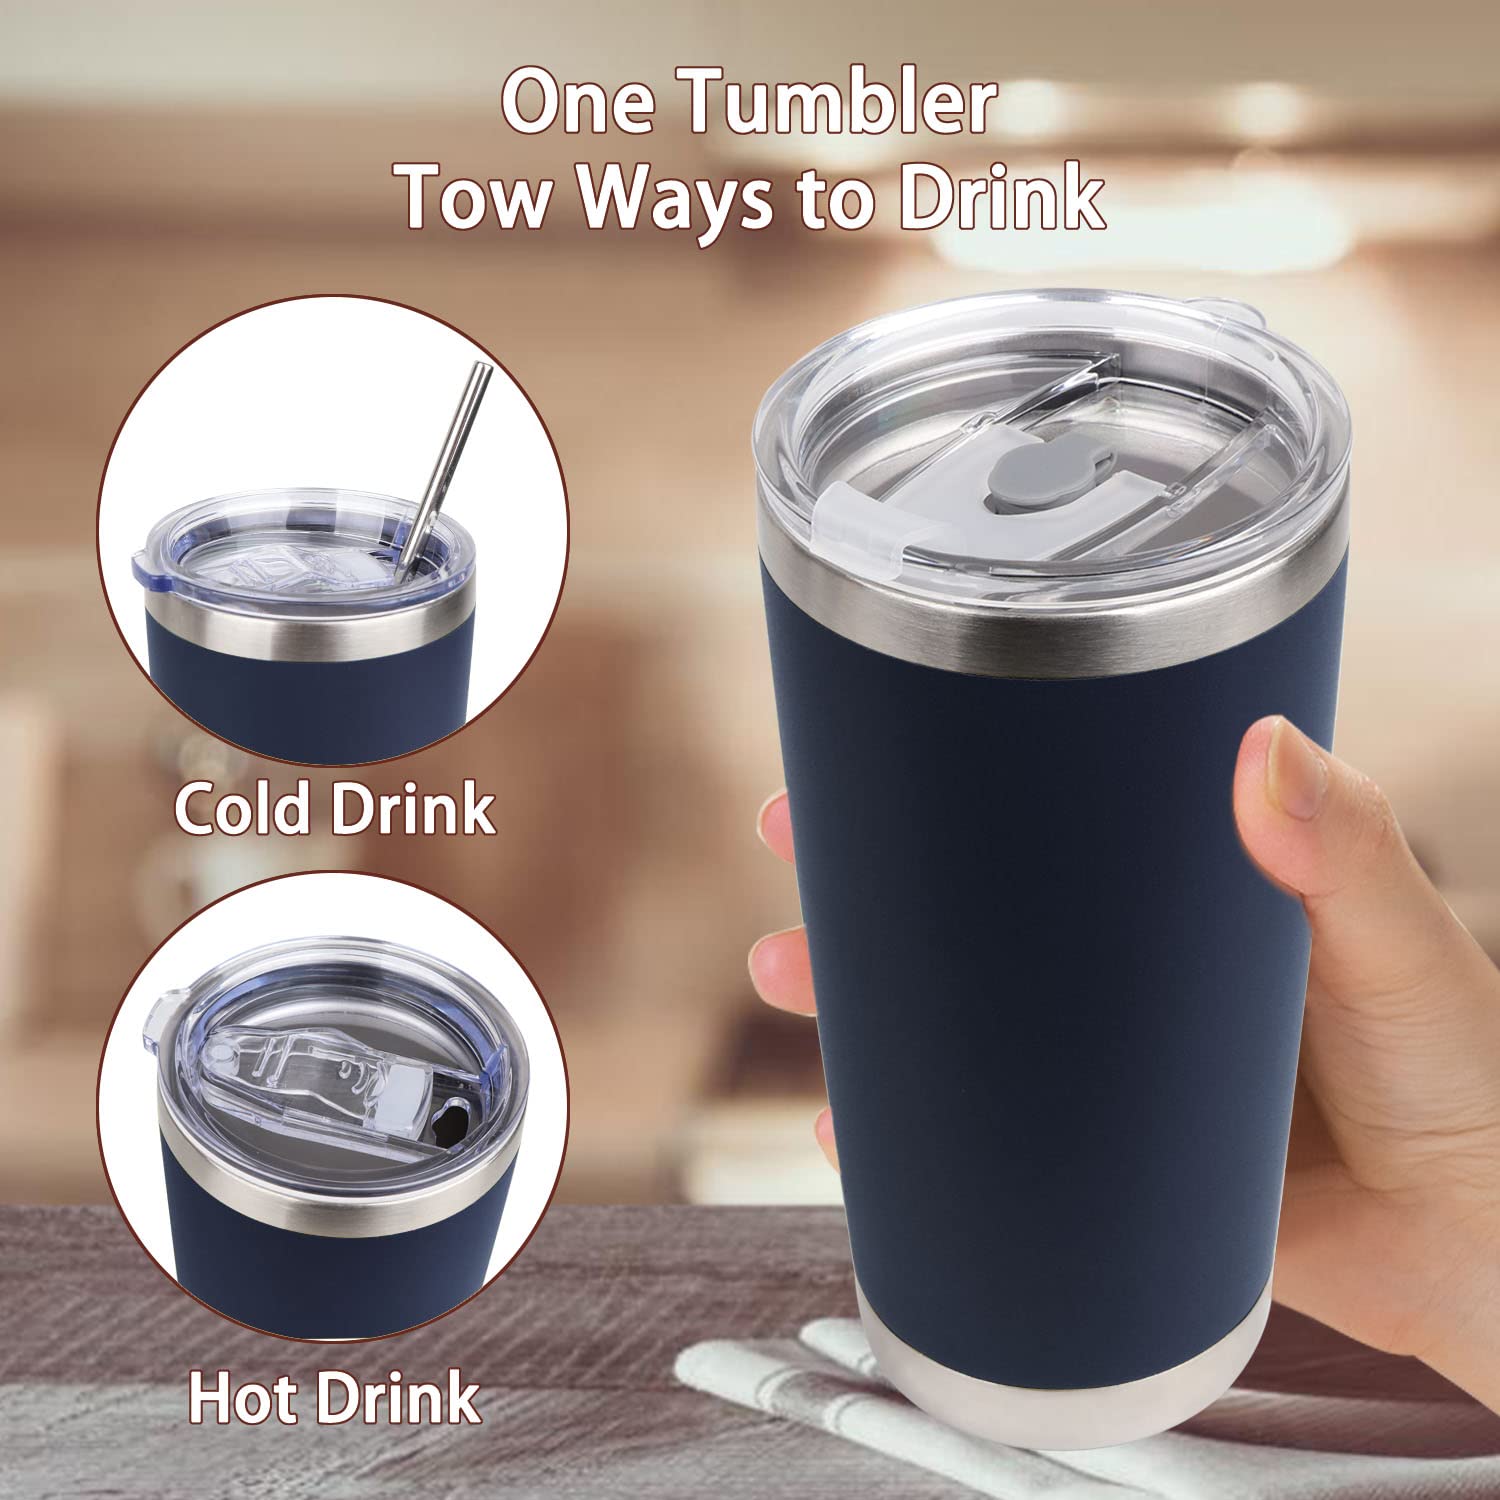 CZBOLINY 20oz/600ml Tumbler with 2 Lids,2 Straws,Insulated Stainless Steel Coffee Travel Mug,Double Wall Vacuum Thermal coffee cups. Navy Blue Tumbler